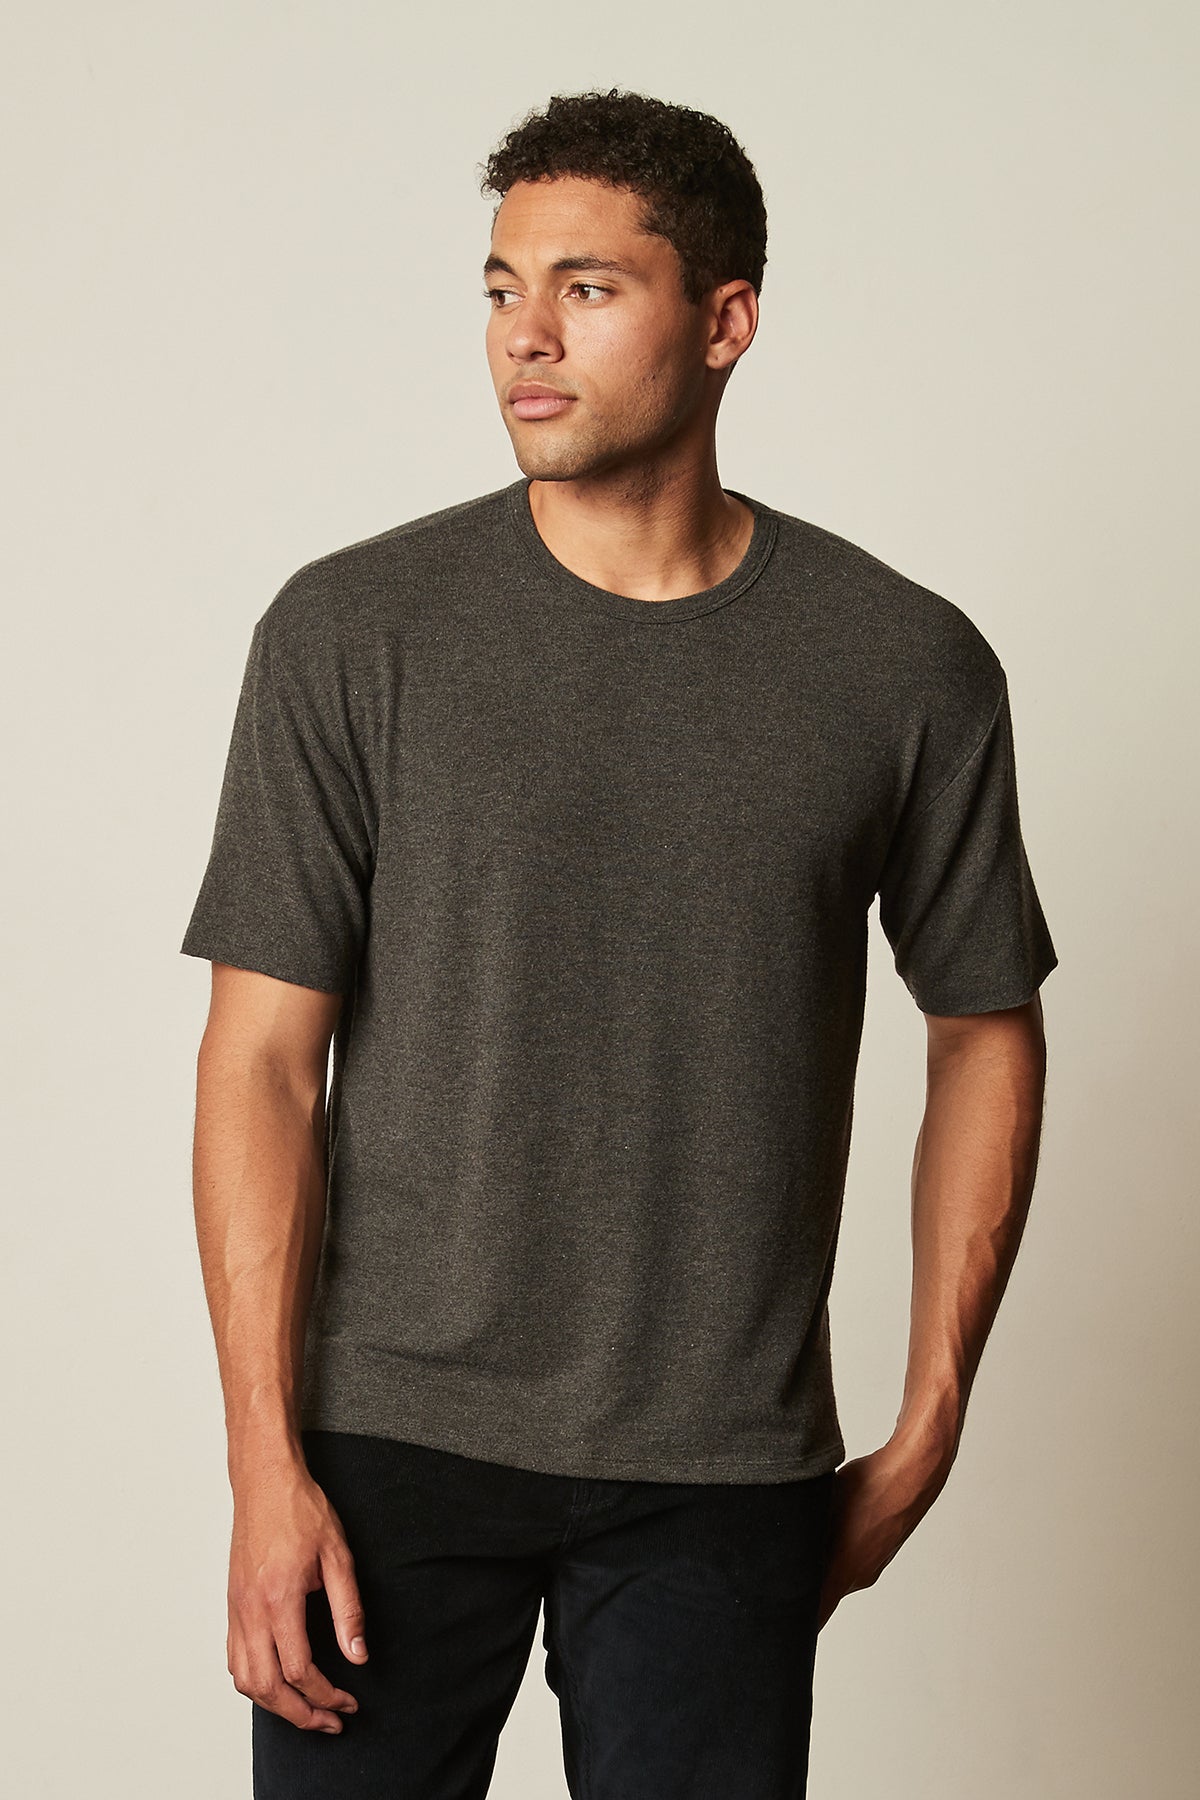 Newall crew neck shirt in dark heathered grey anthracite color front-24983363846337